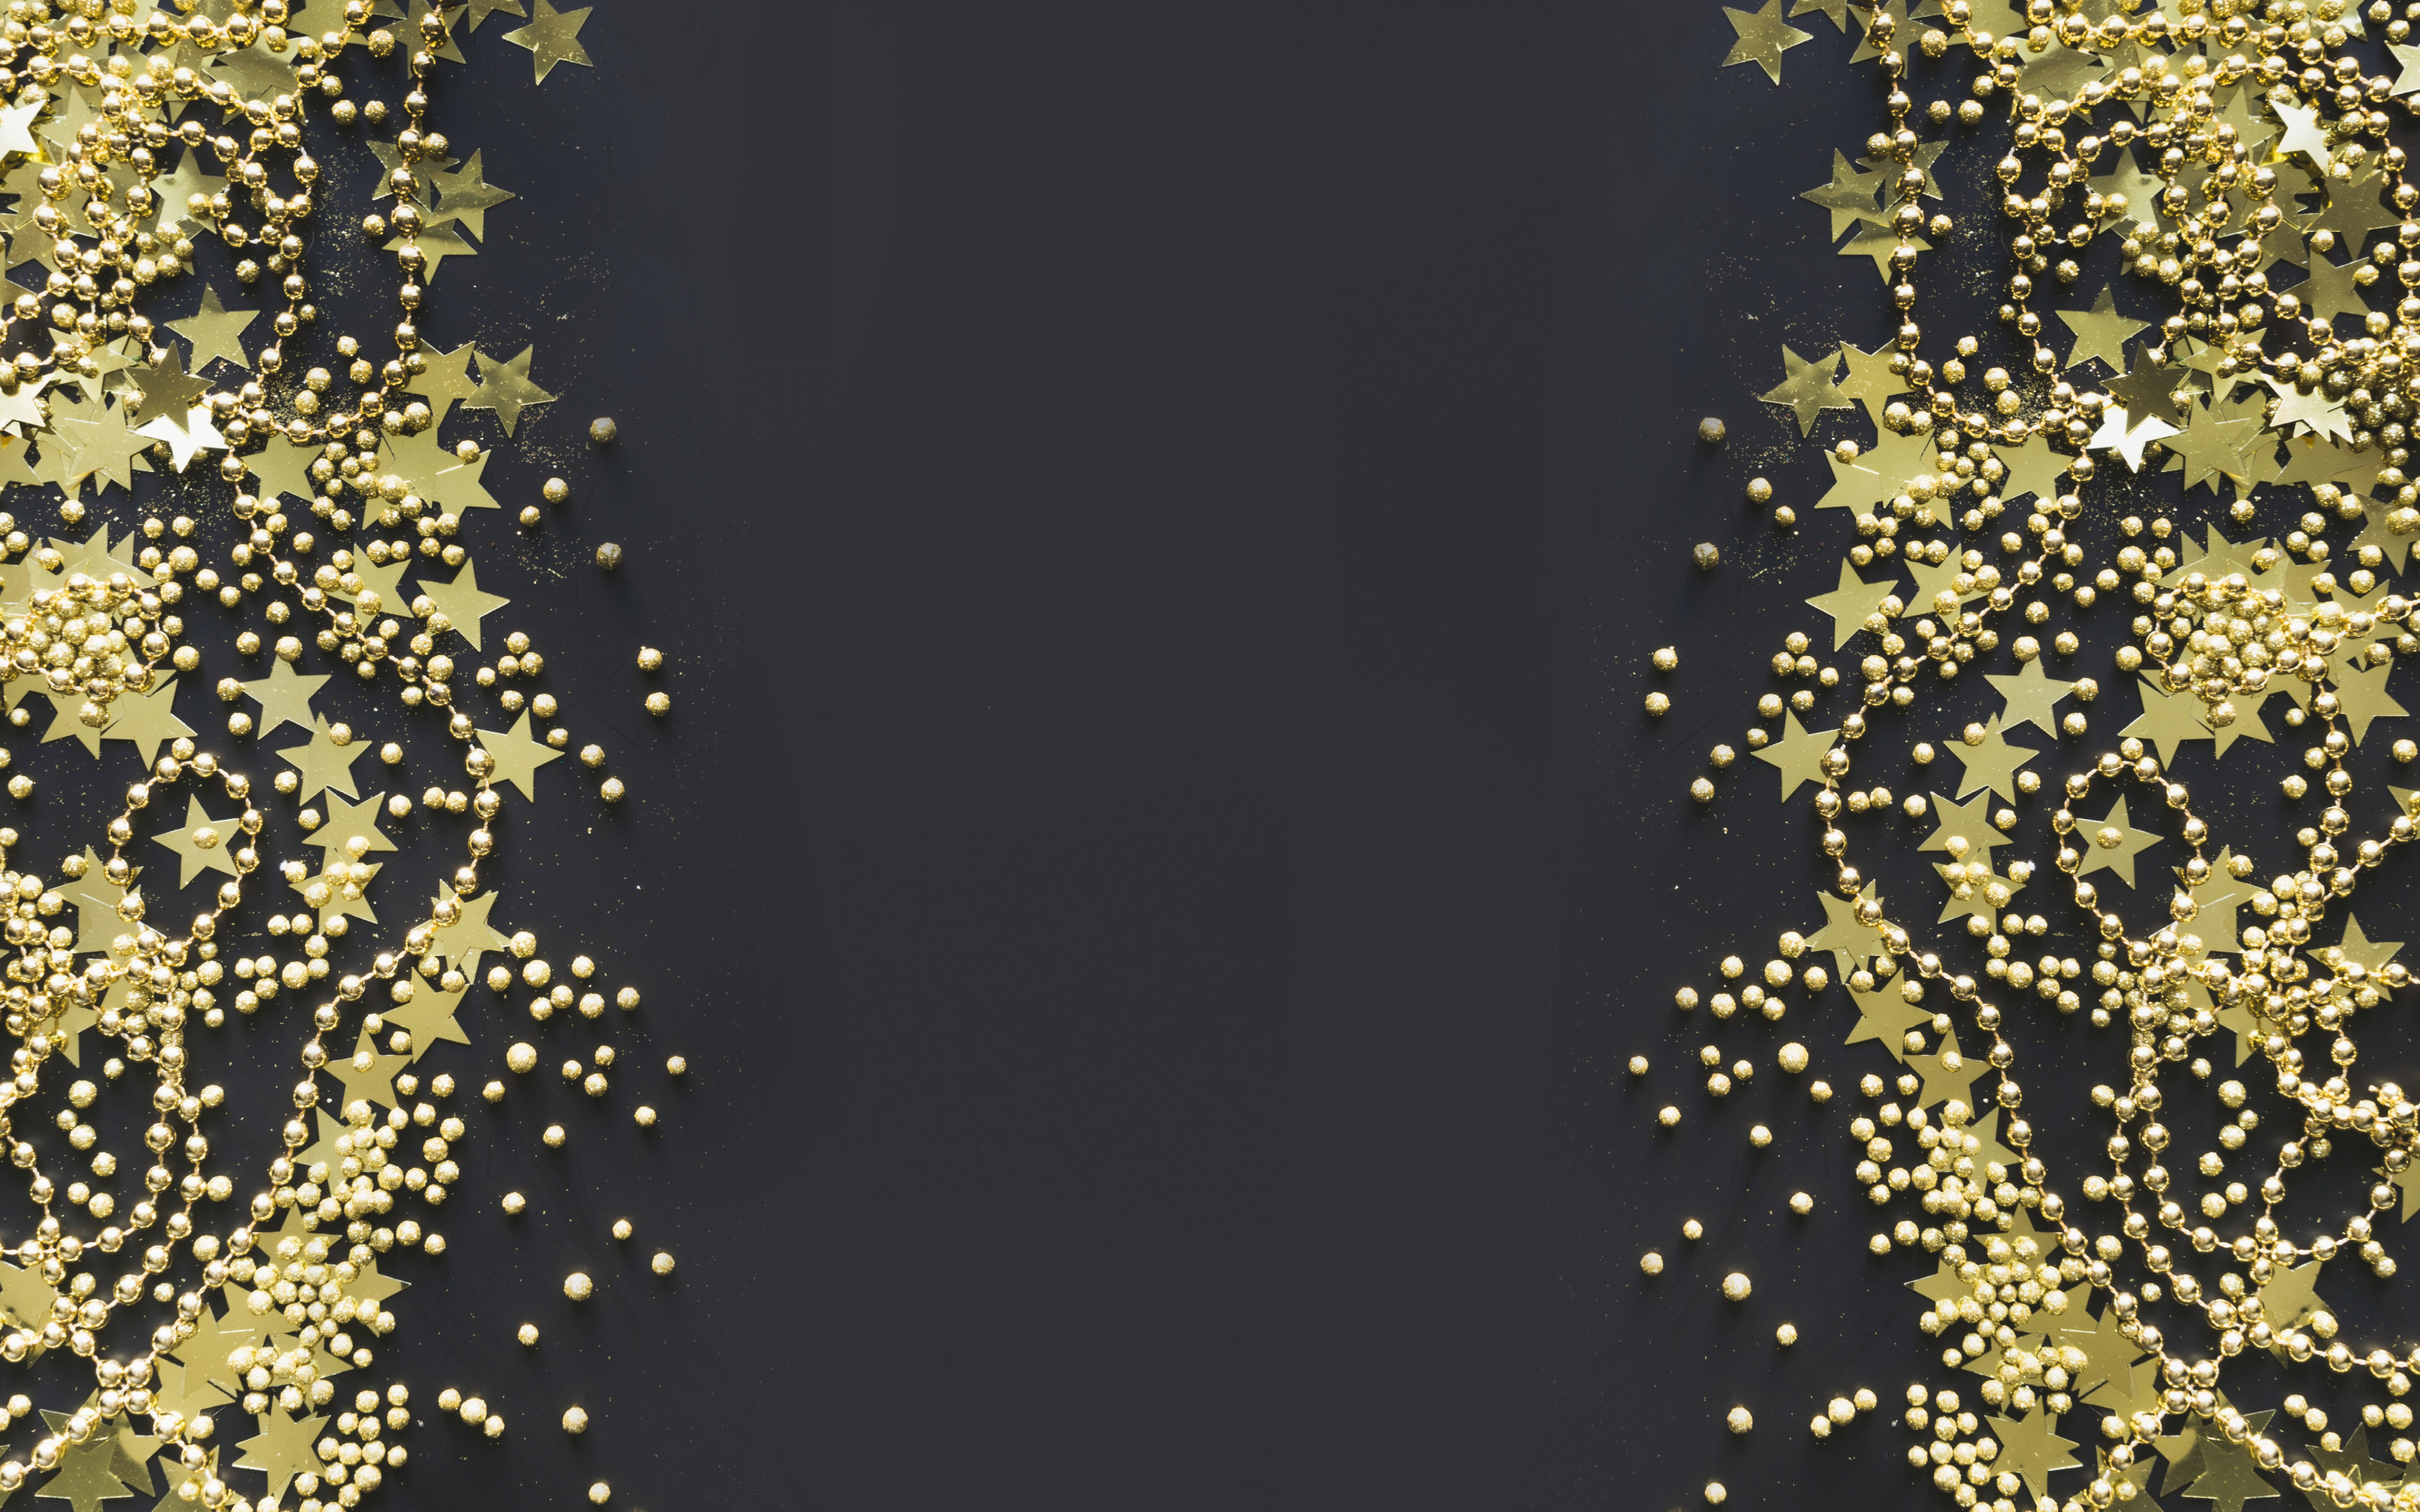 Download wallpaper Black background with golden stars, Christmas background, golden stars, Happy New Year, Christmas, xmas for desktop with resolution 2880x1800. High Quality HD picture wallpaper